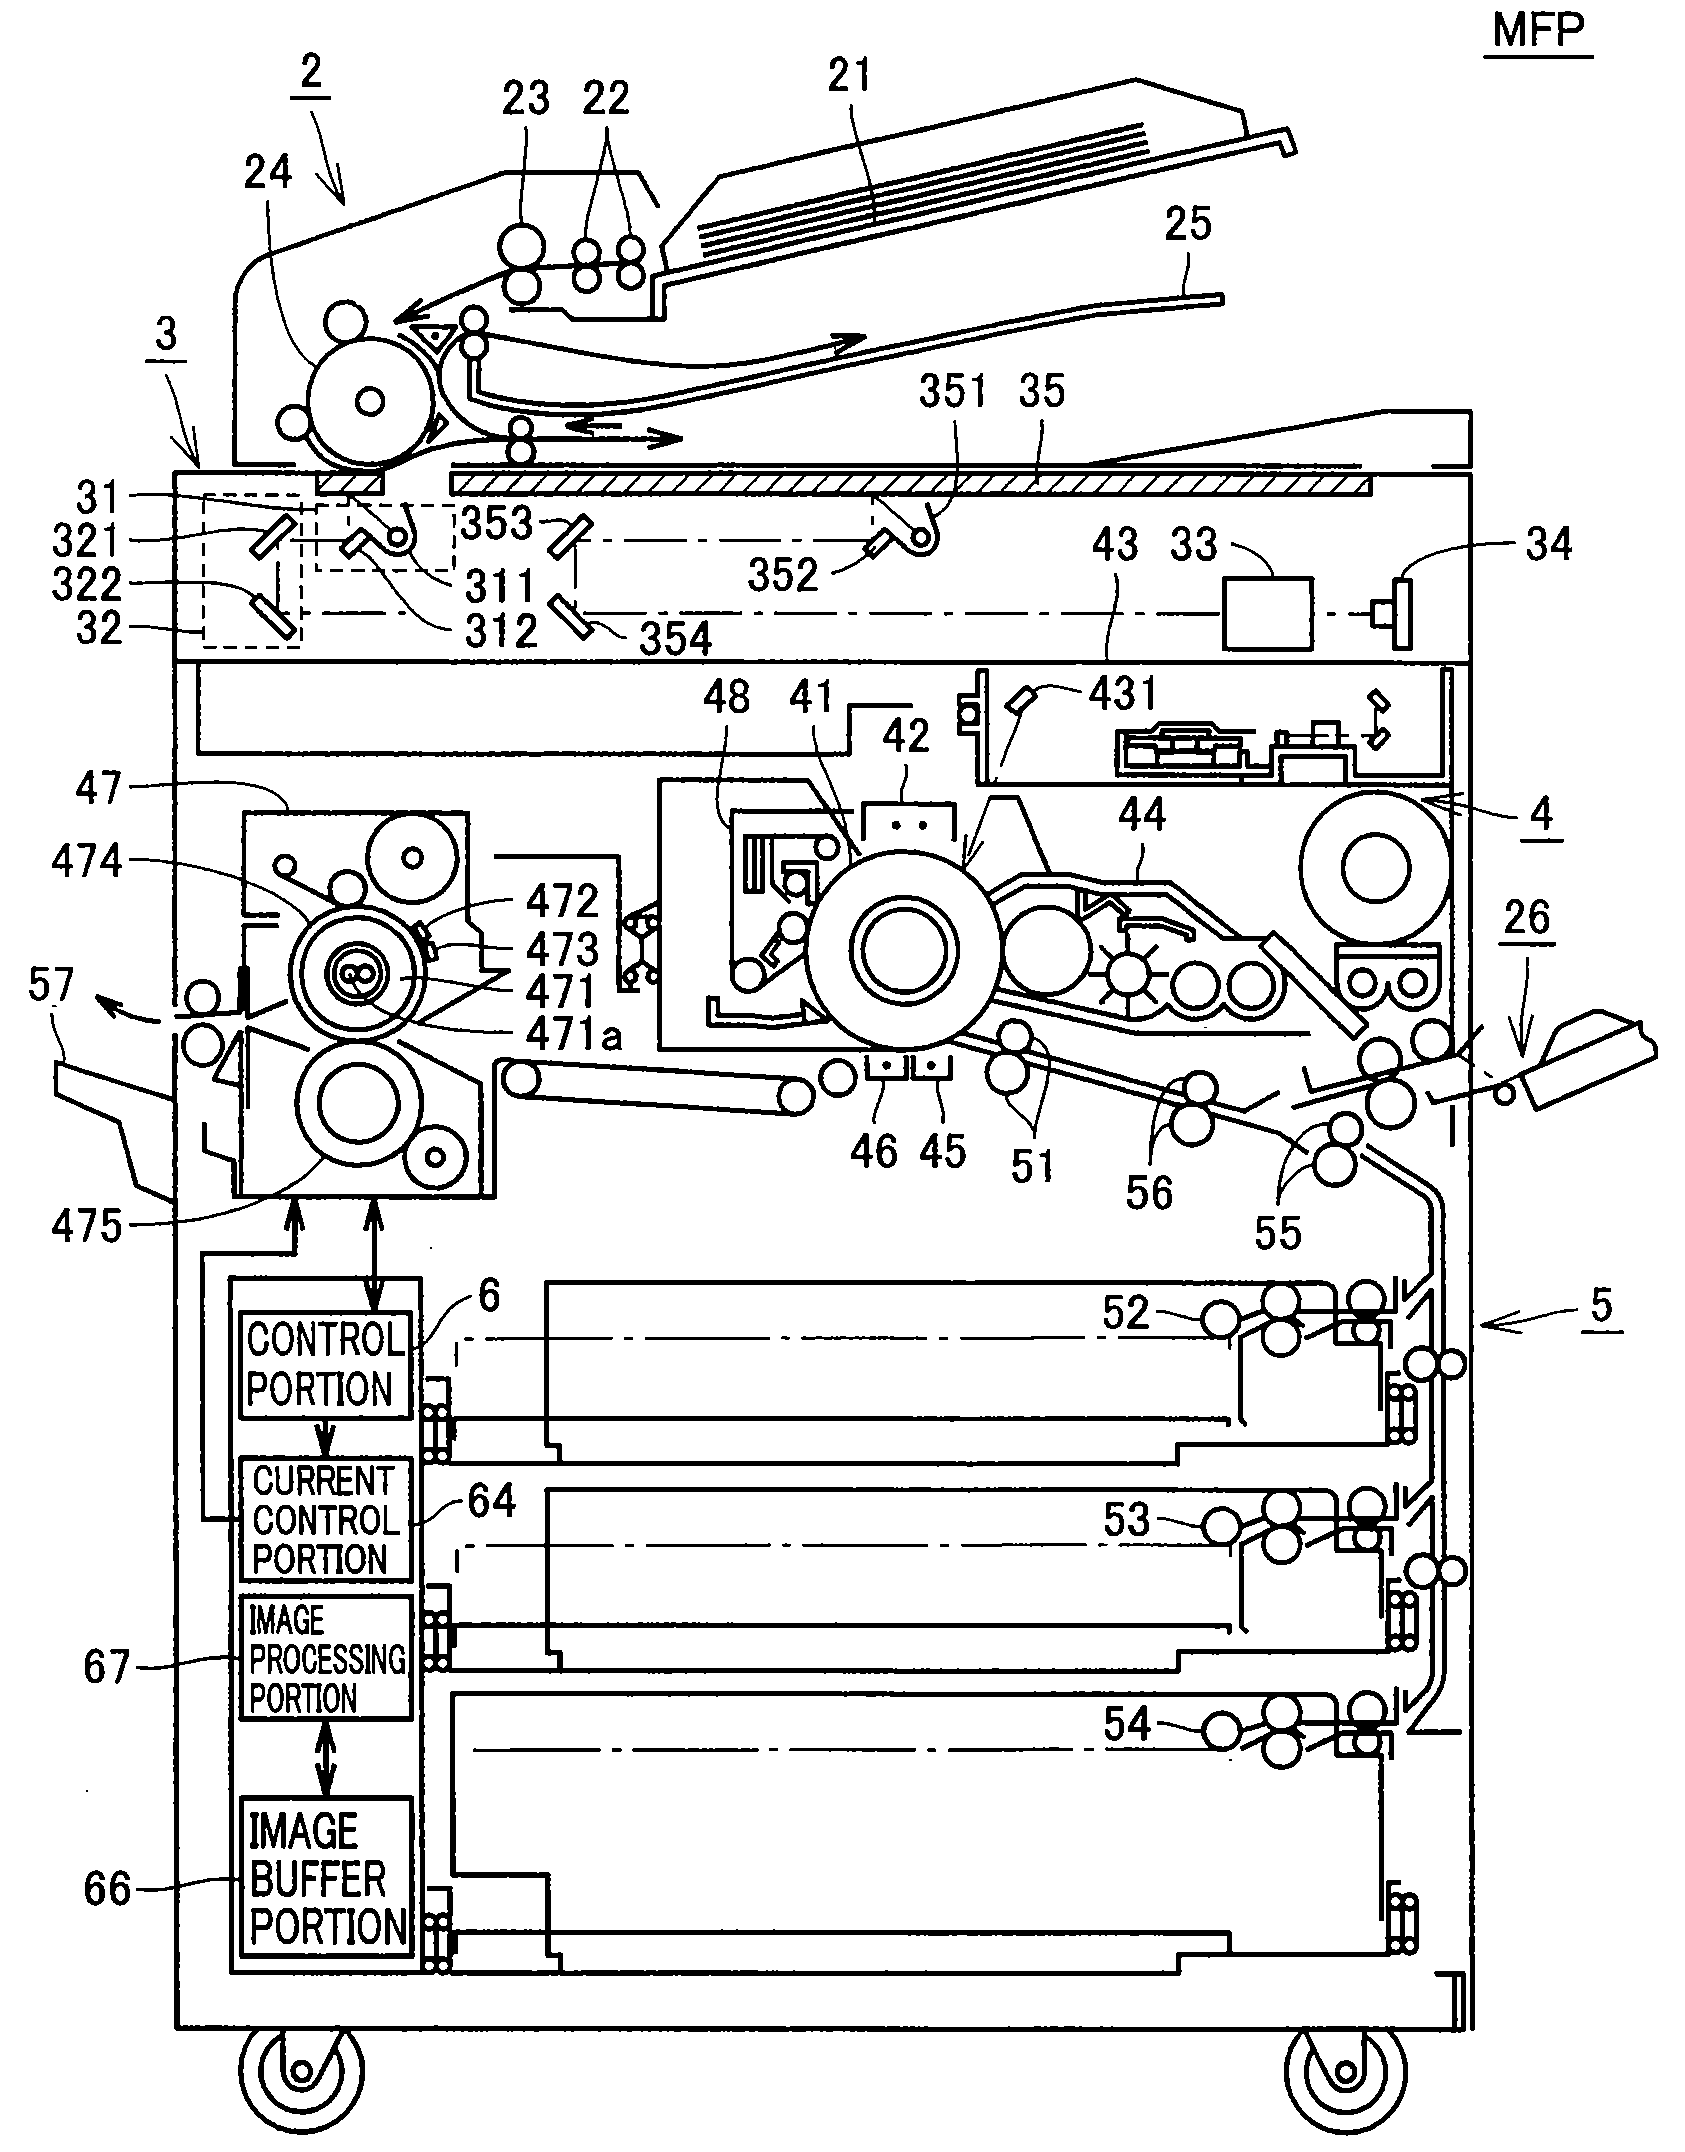 Image formation apparatus including hot-roll type fixing device and method for determining malfunction of temperature sensor in the same